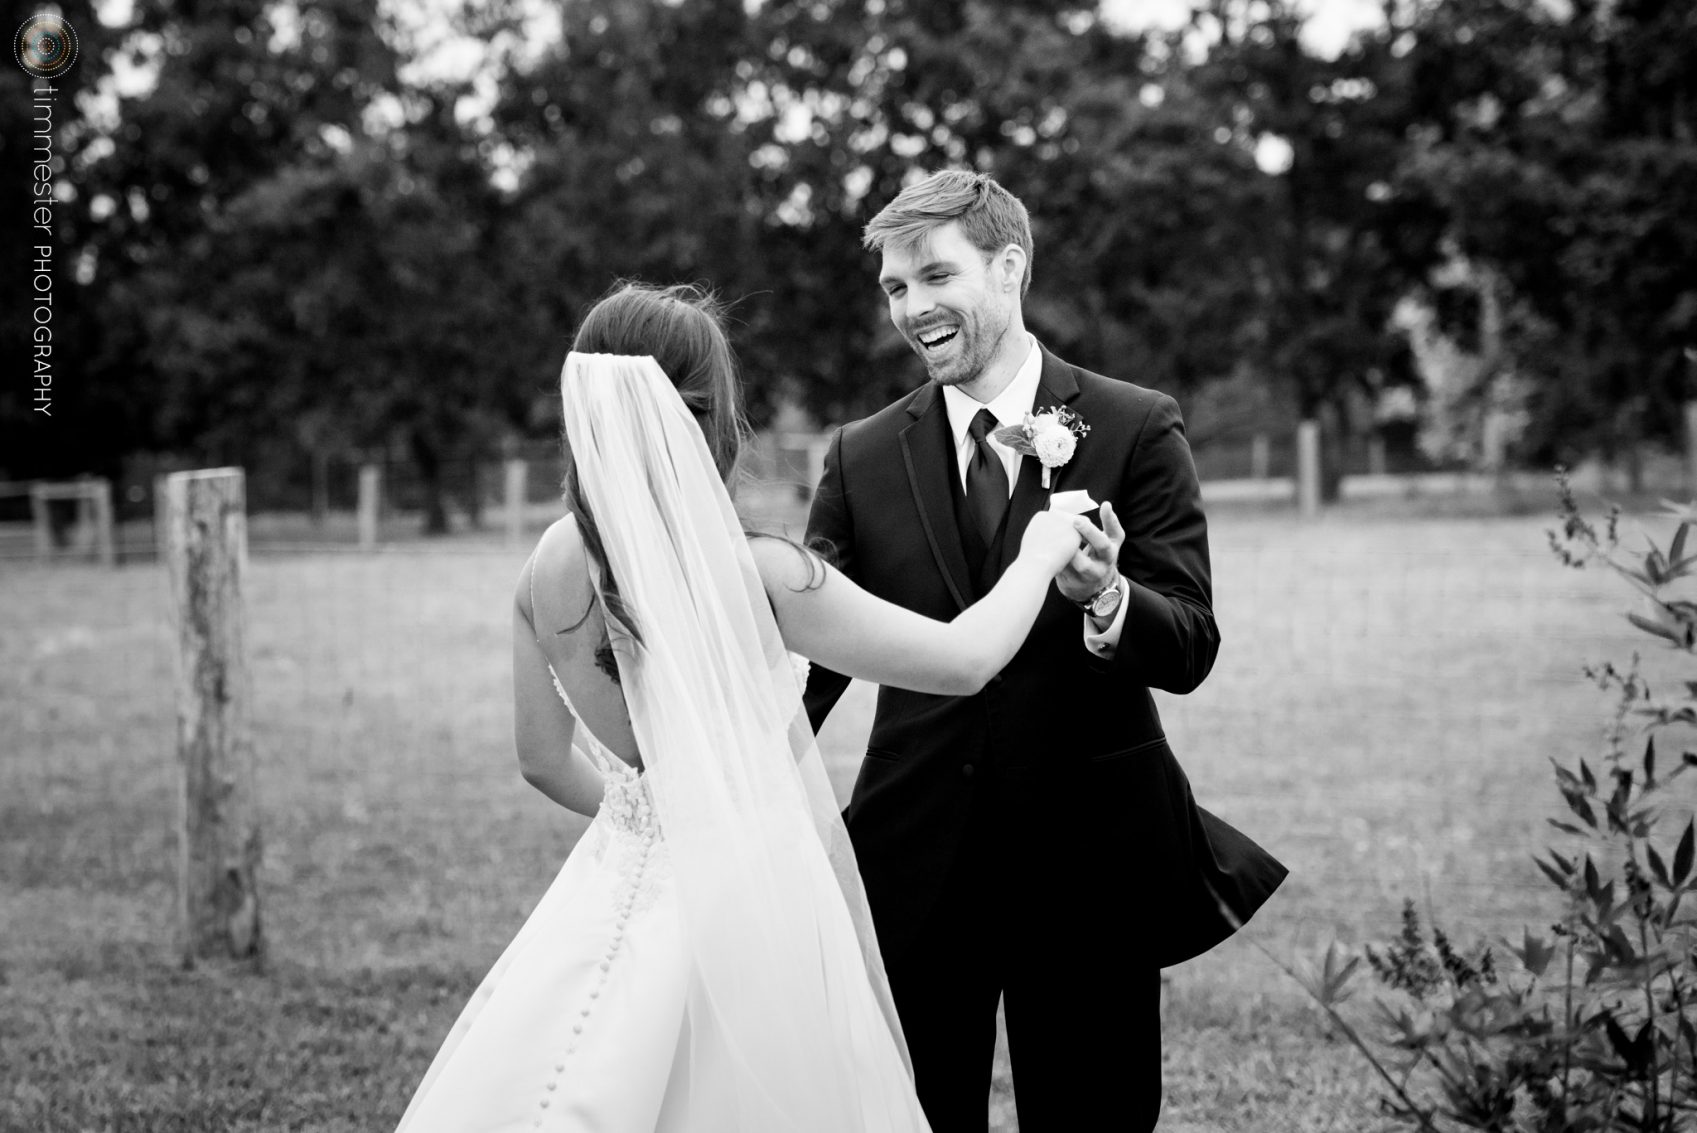 A bride and groom's First Look in NC at Sassafras Fork Farm.